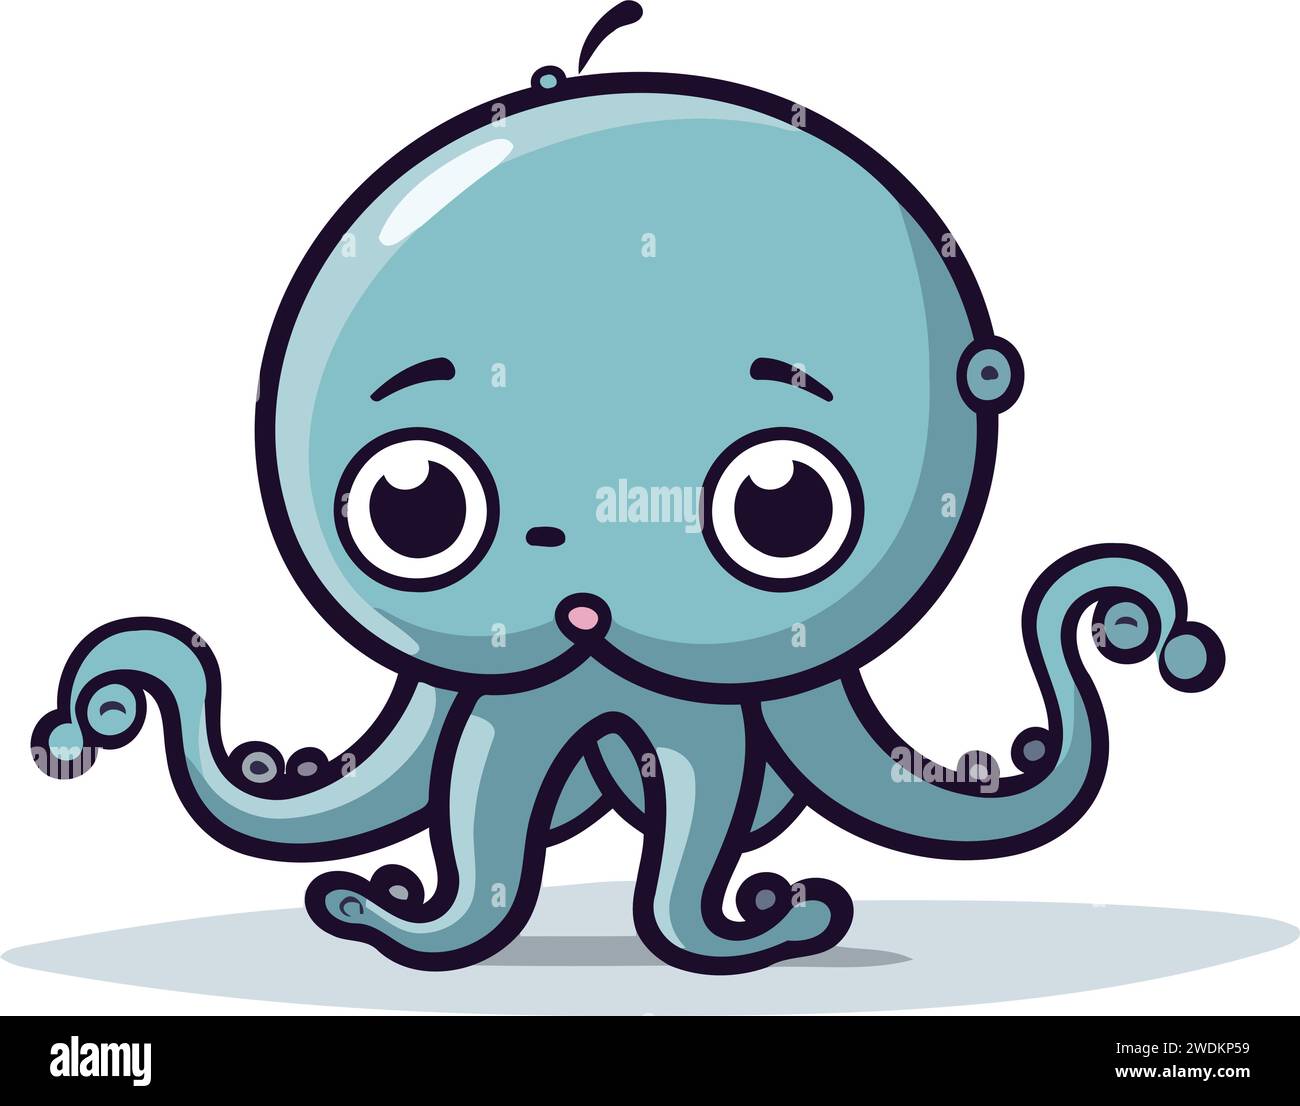 A cartoon illustration of a squid looking angry Stock Vector Image